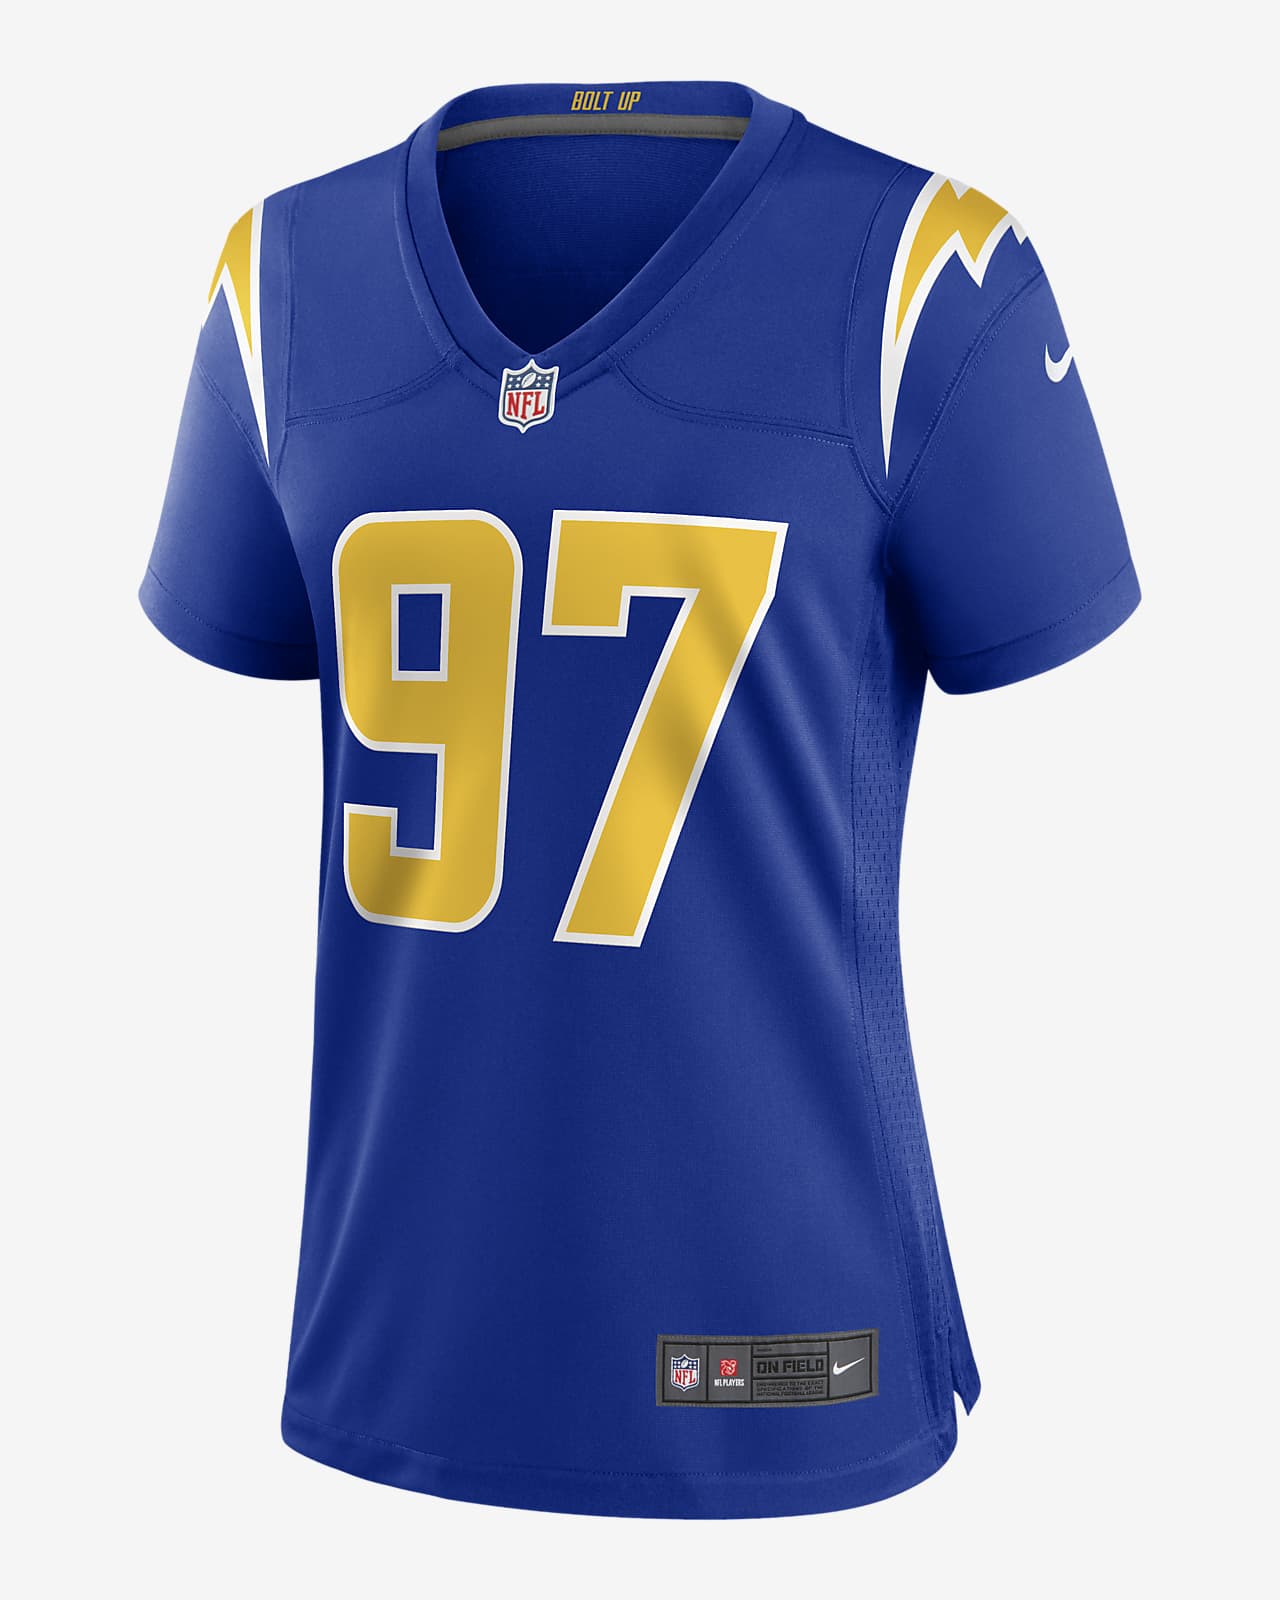 NFL Los Angeles Chargers (Joey Bosa) Women's Game Football Jersey. Nike.com